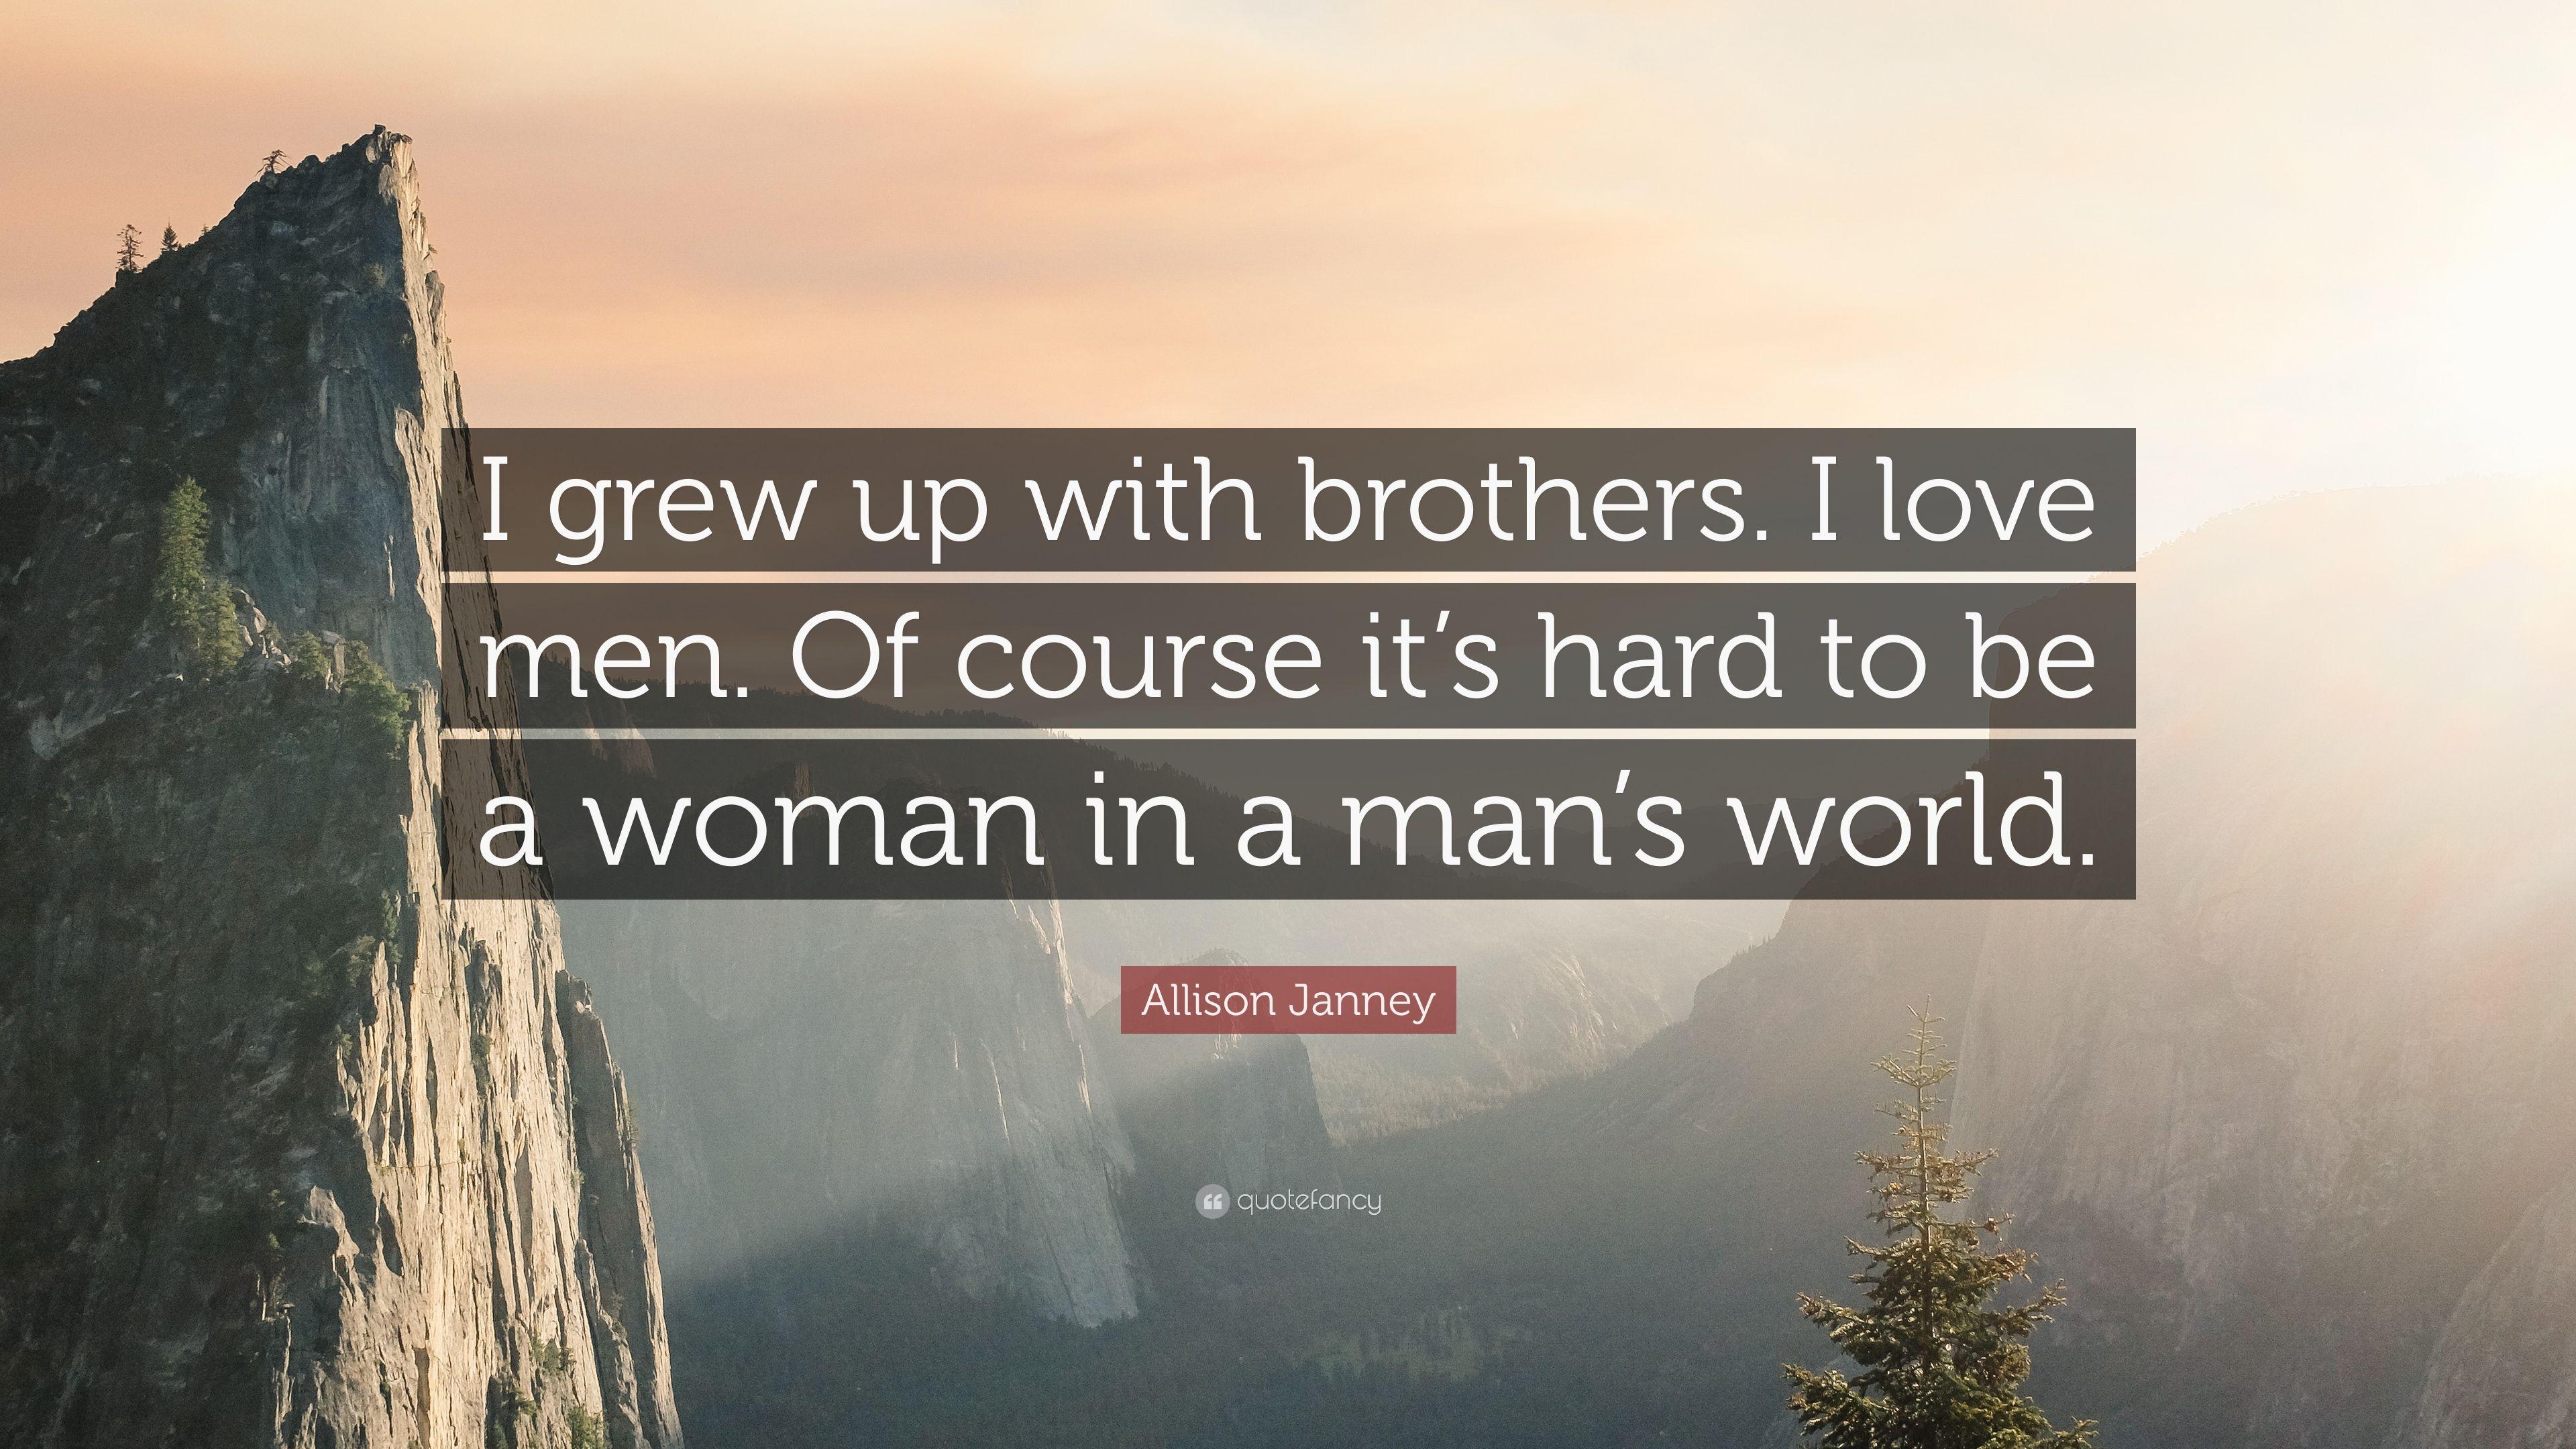 Allison Janney Quote: “I grew up with brothers. I love men. Of